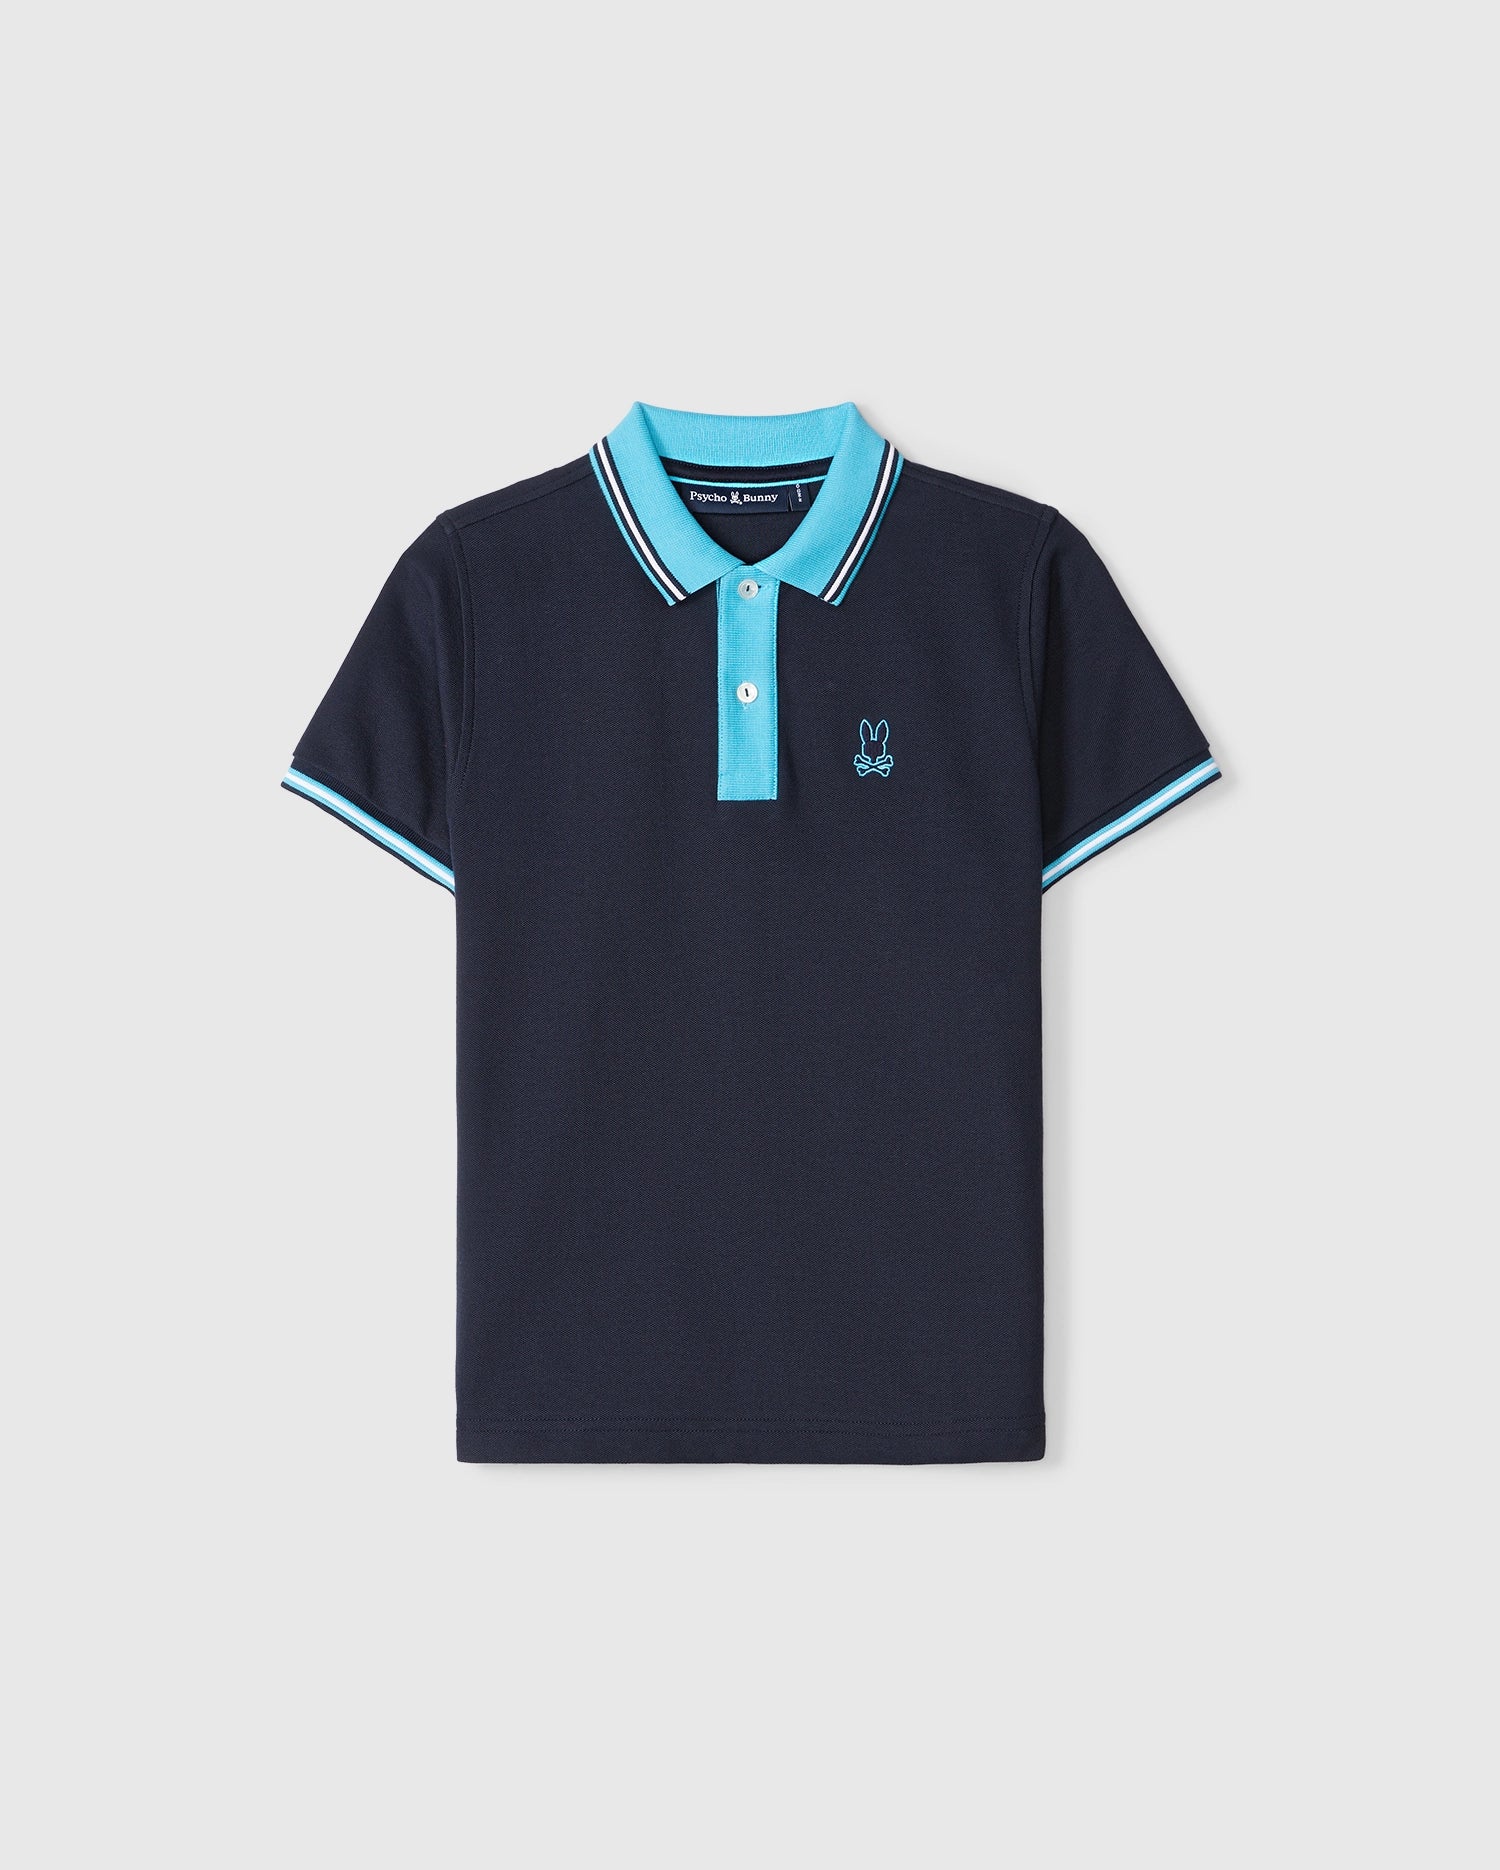 A navy blue Psycho Bunny Salina pique polo shirt with turquoise collar and sleeve trim, featuring a small embroidered rabbit logo on the left chest, displayed against a plain background.